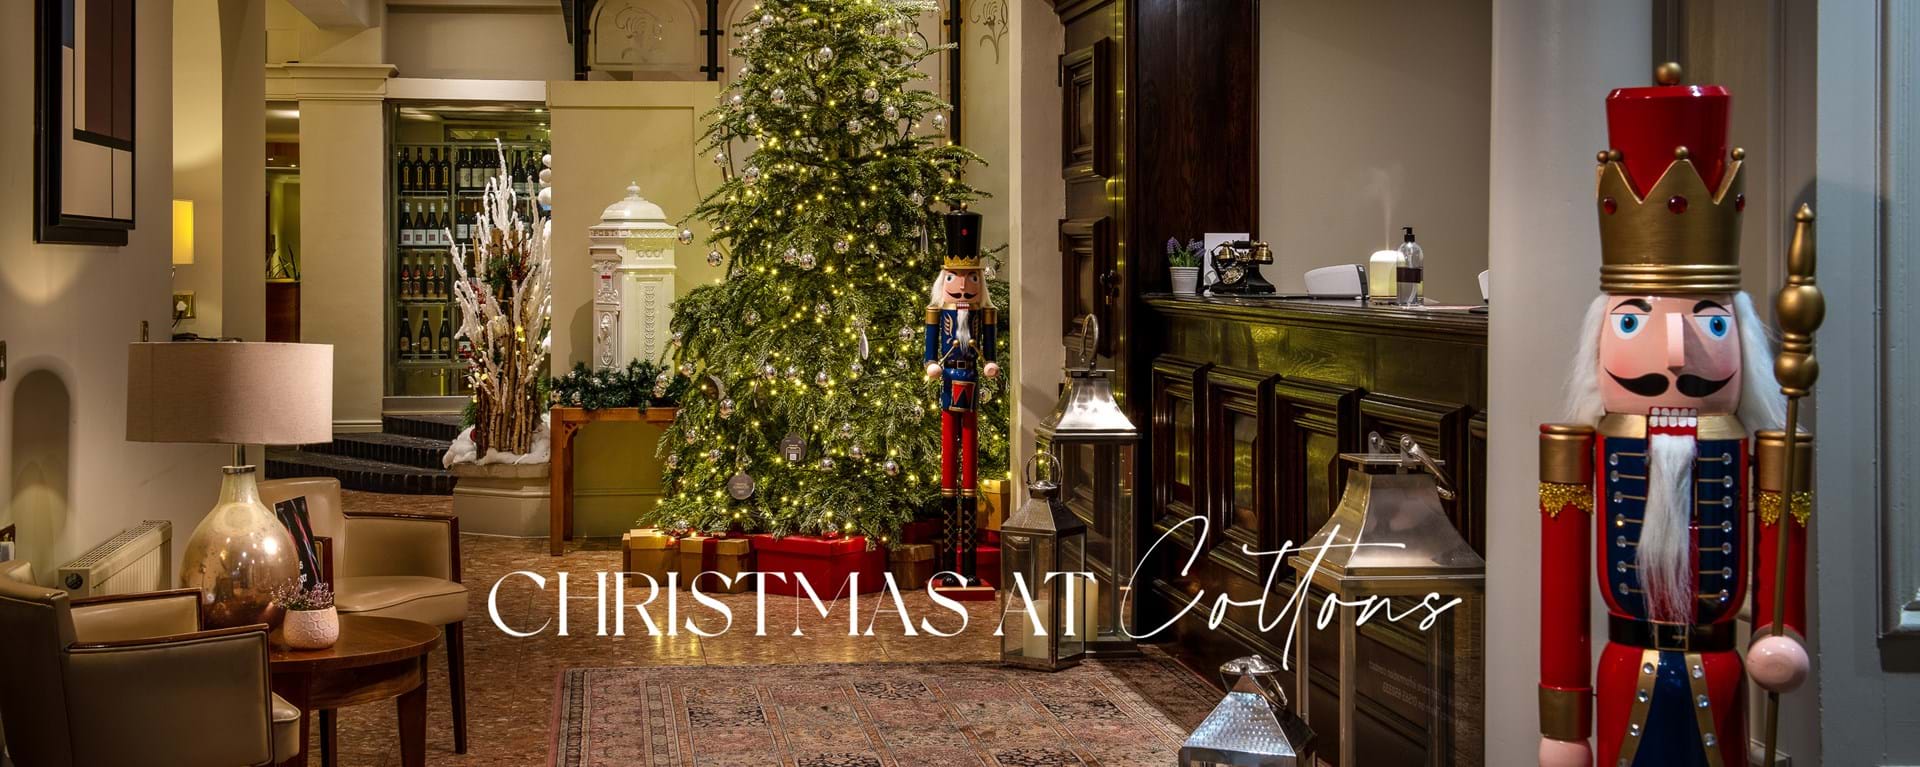 Cottons Christmas Title Image